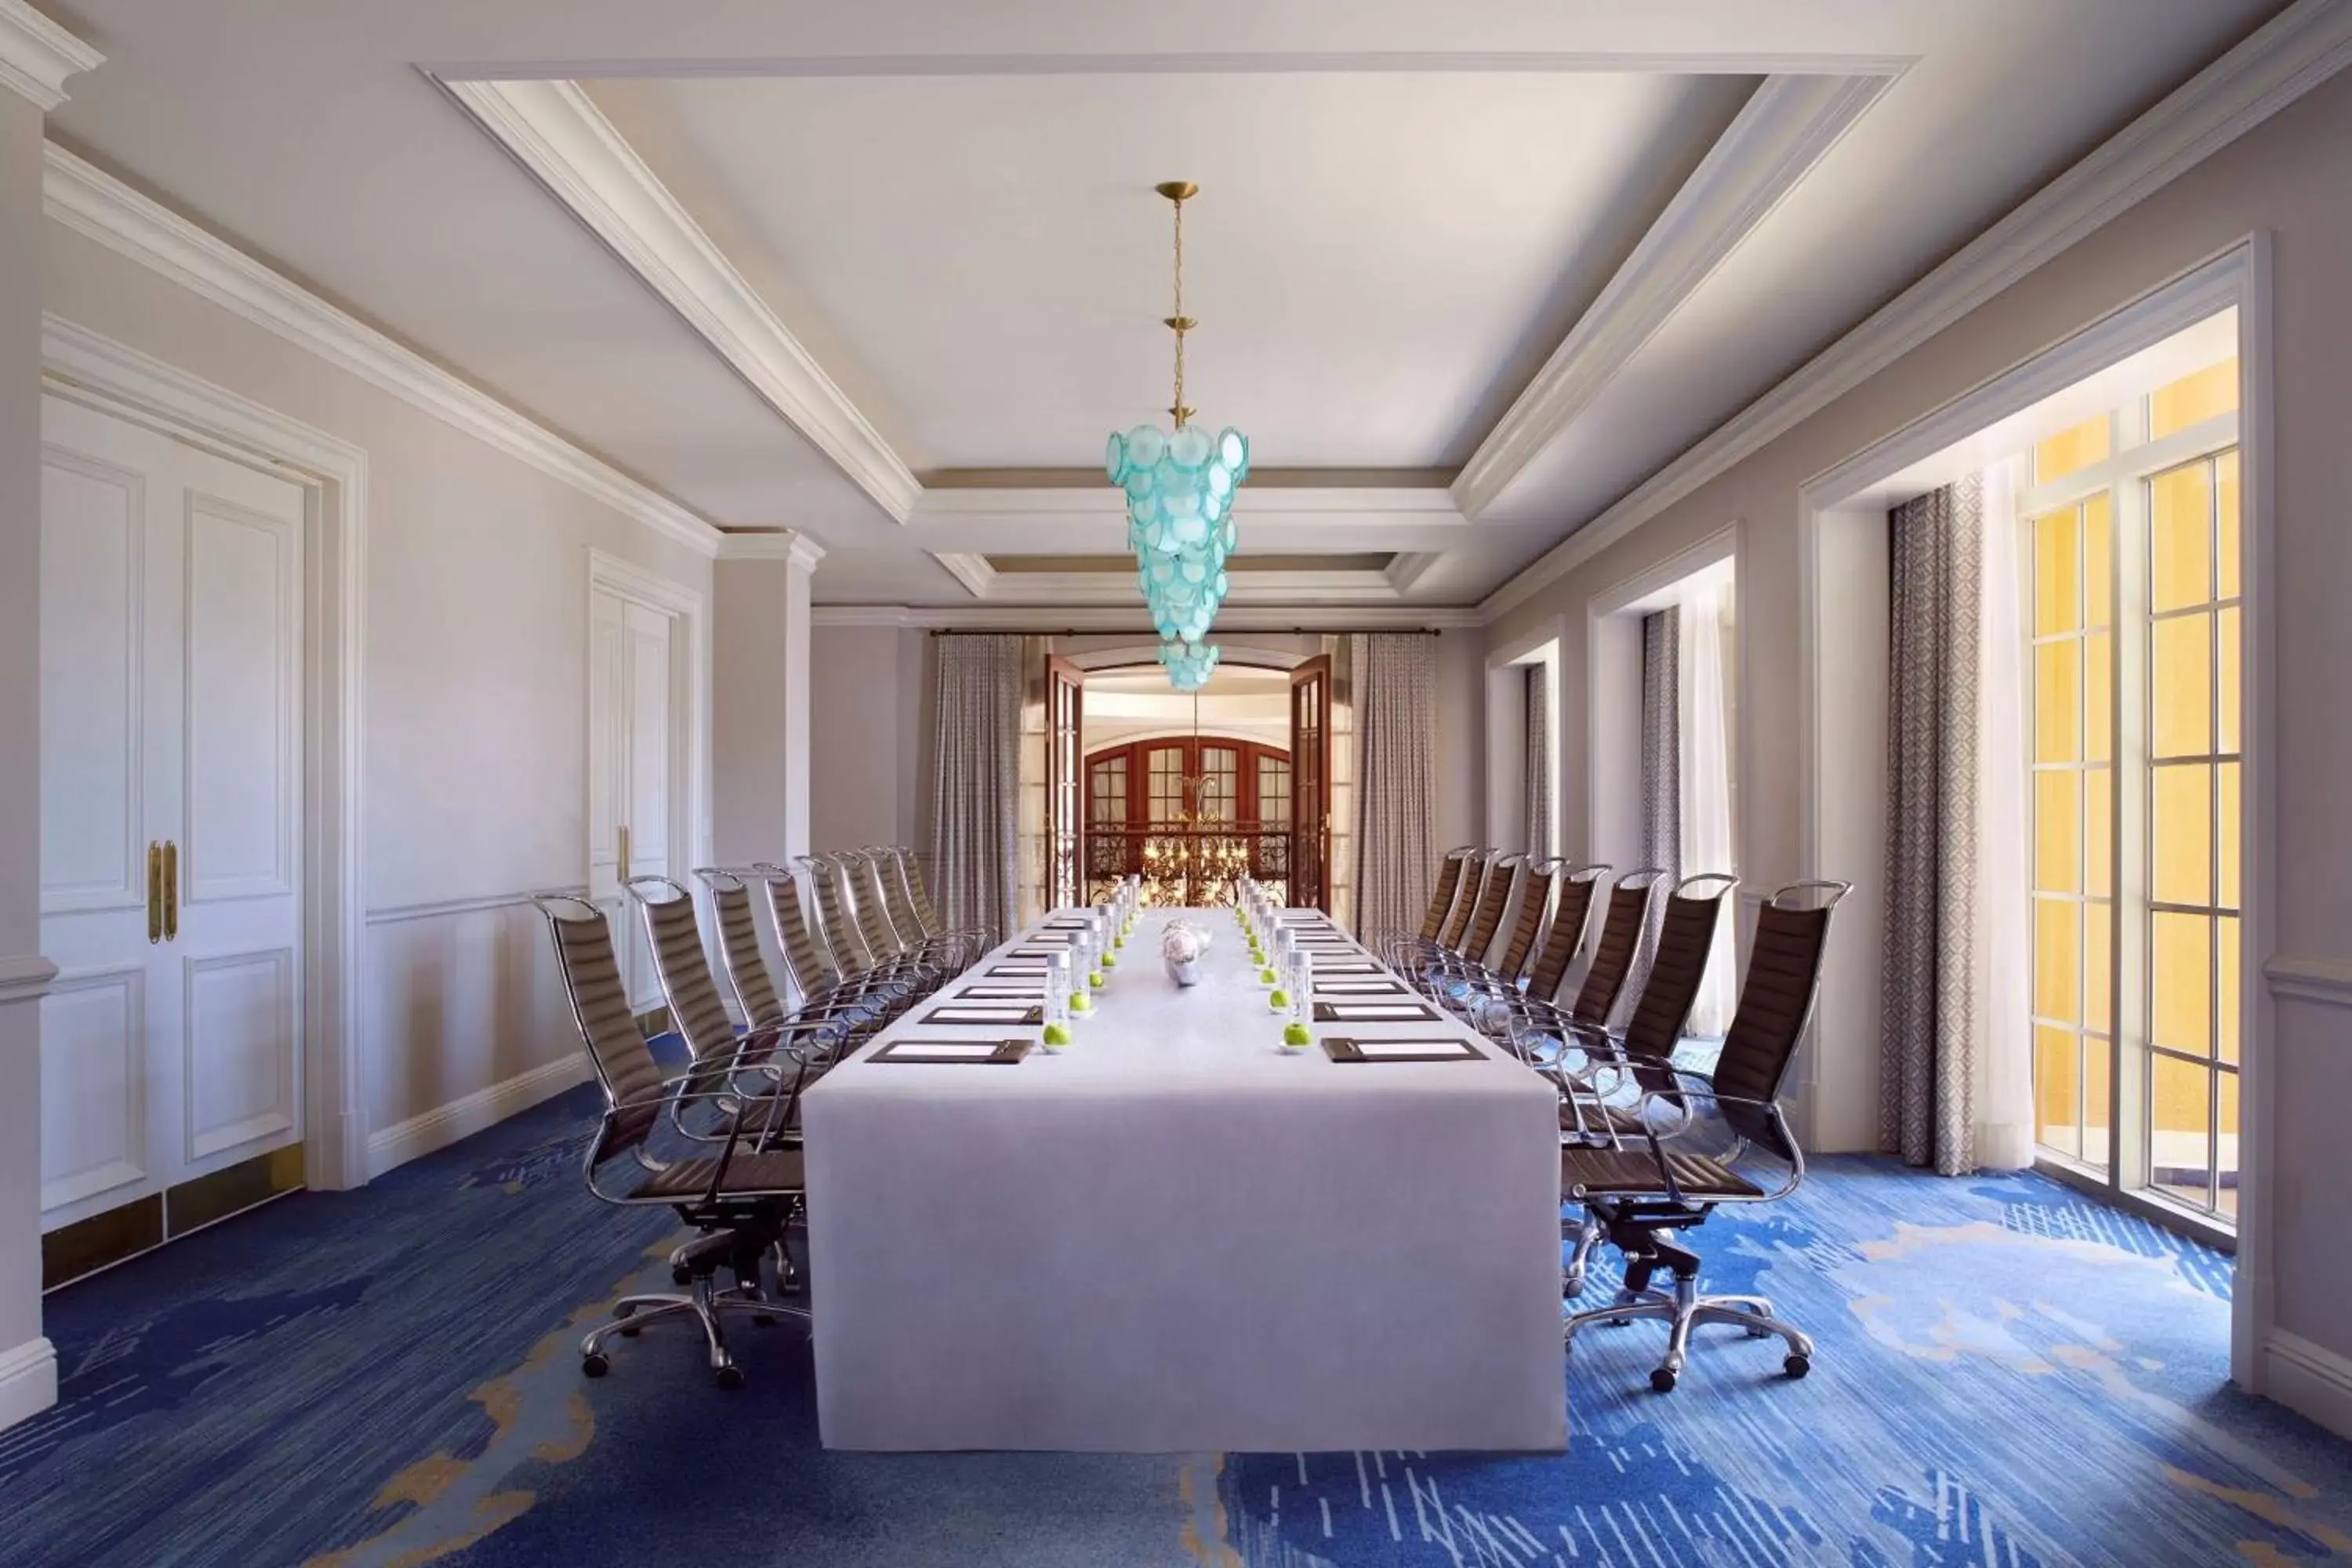 Meeting/conference room in The Ritz Carlton Key Biscayne, Miami